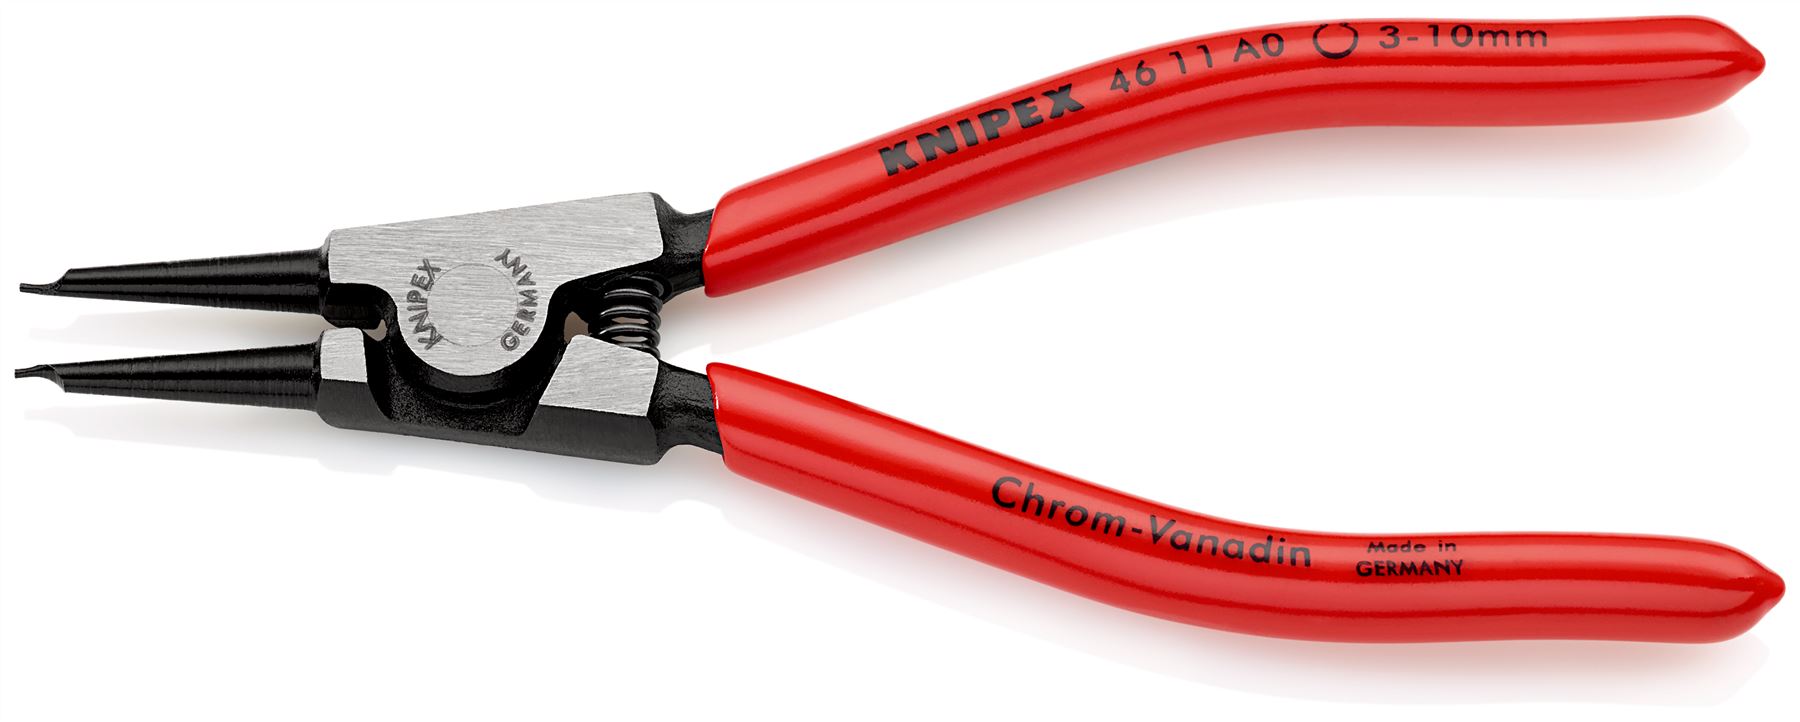 KNIPEX Circlip Pliers for External Circlips on Shafts 140mm 0.9mm Diameter Tips 46 11 A0